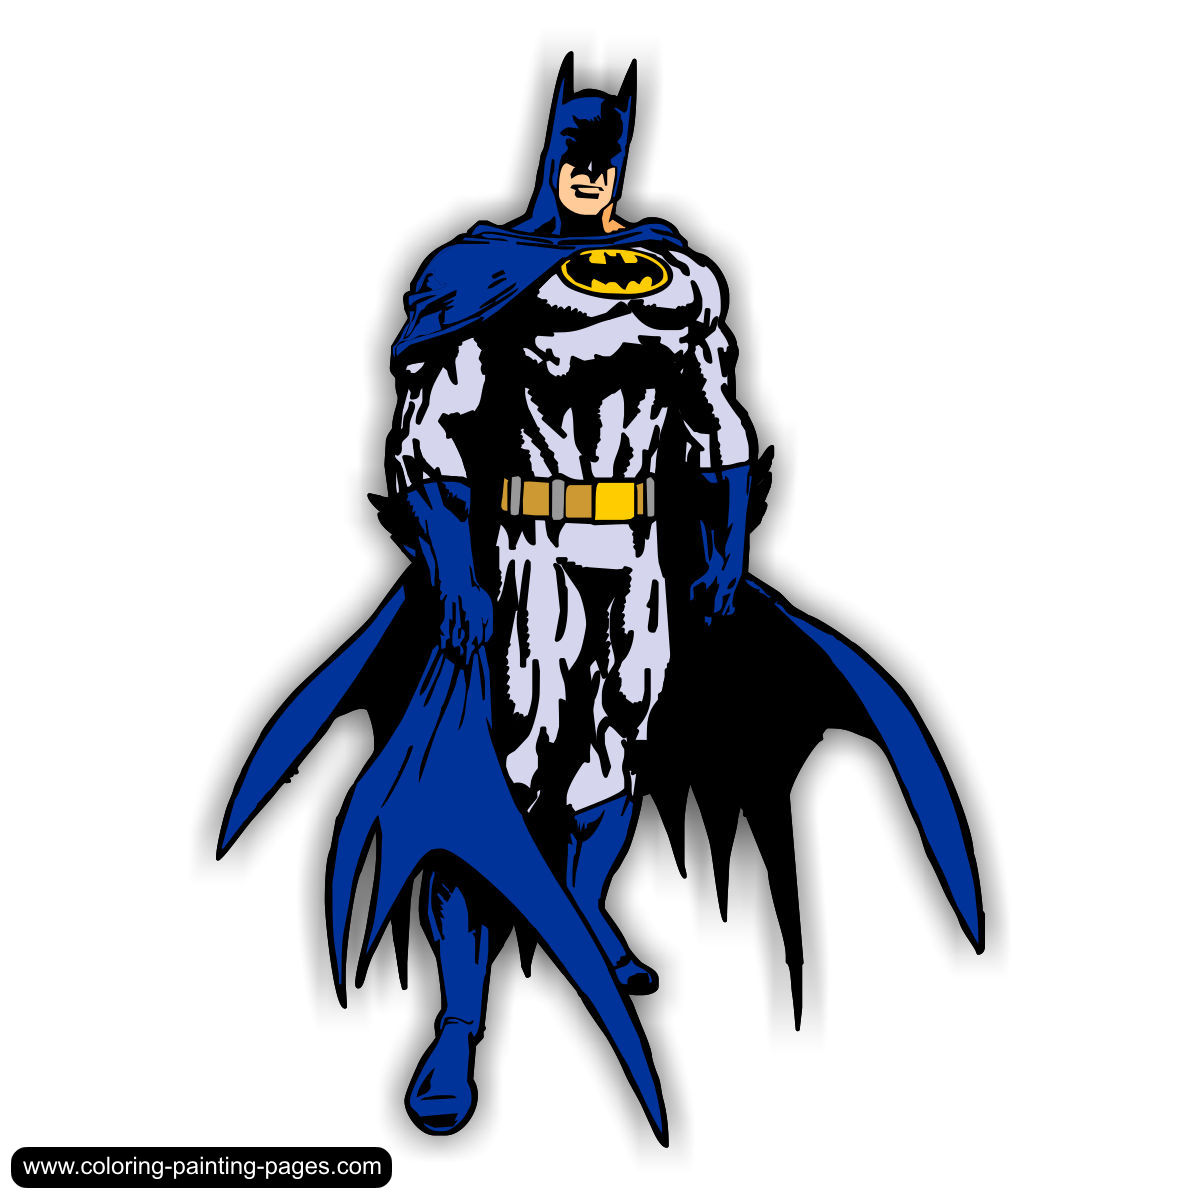 Batman vector images free vector for free download about free clip art